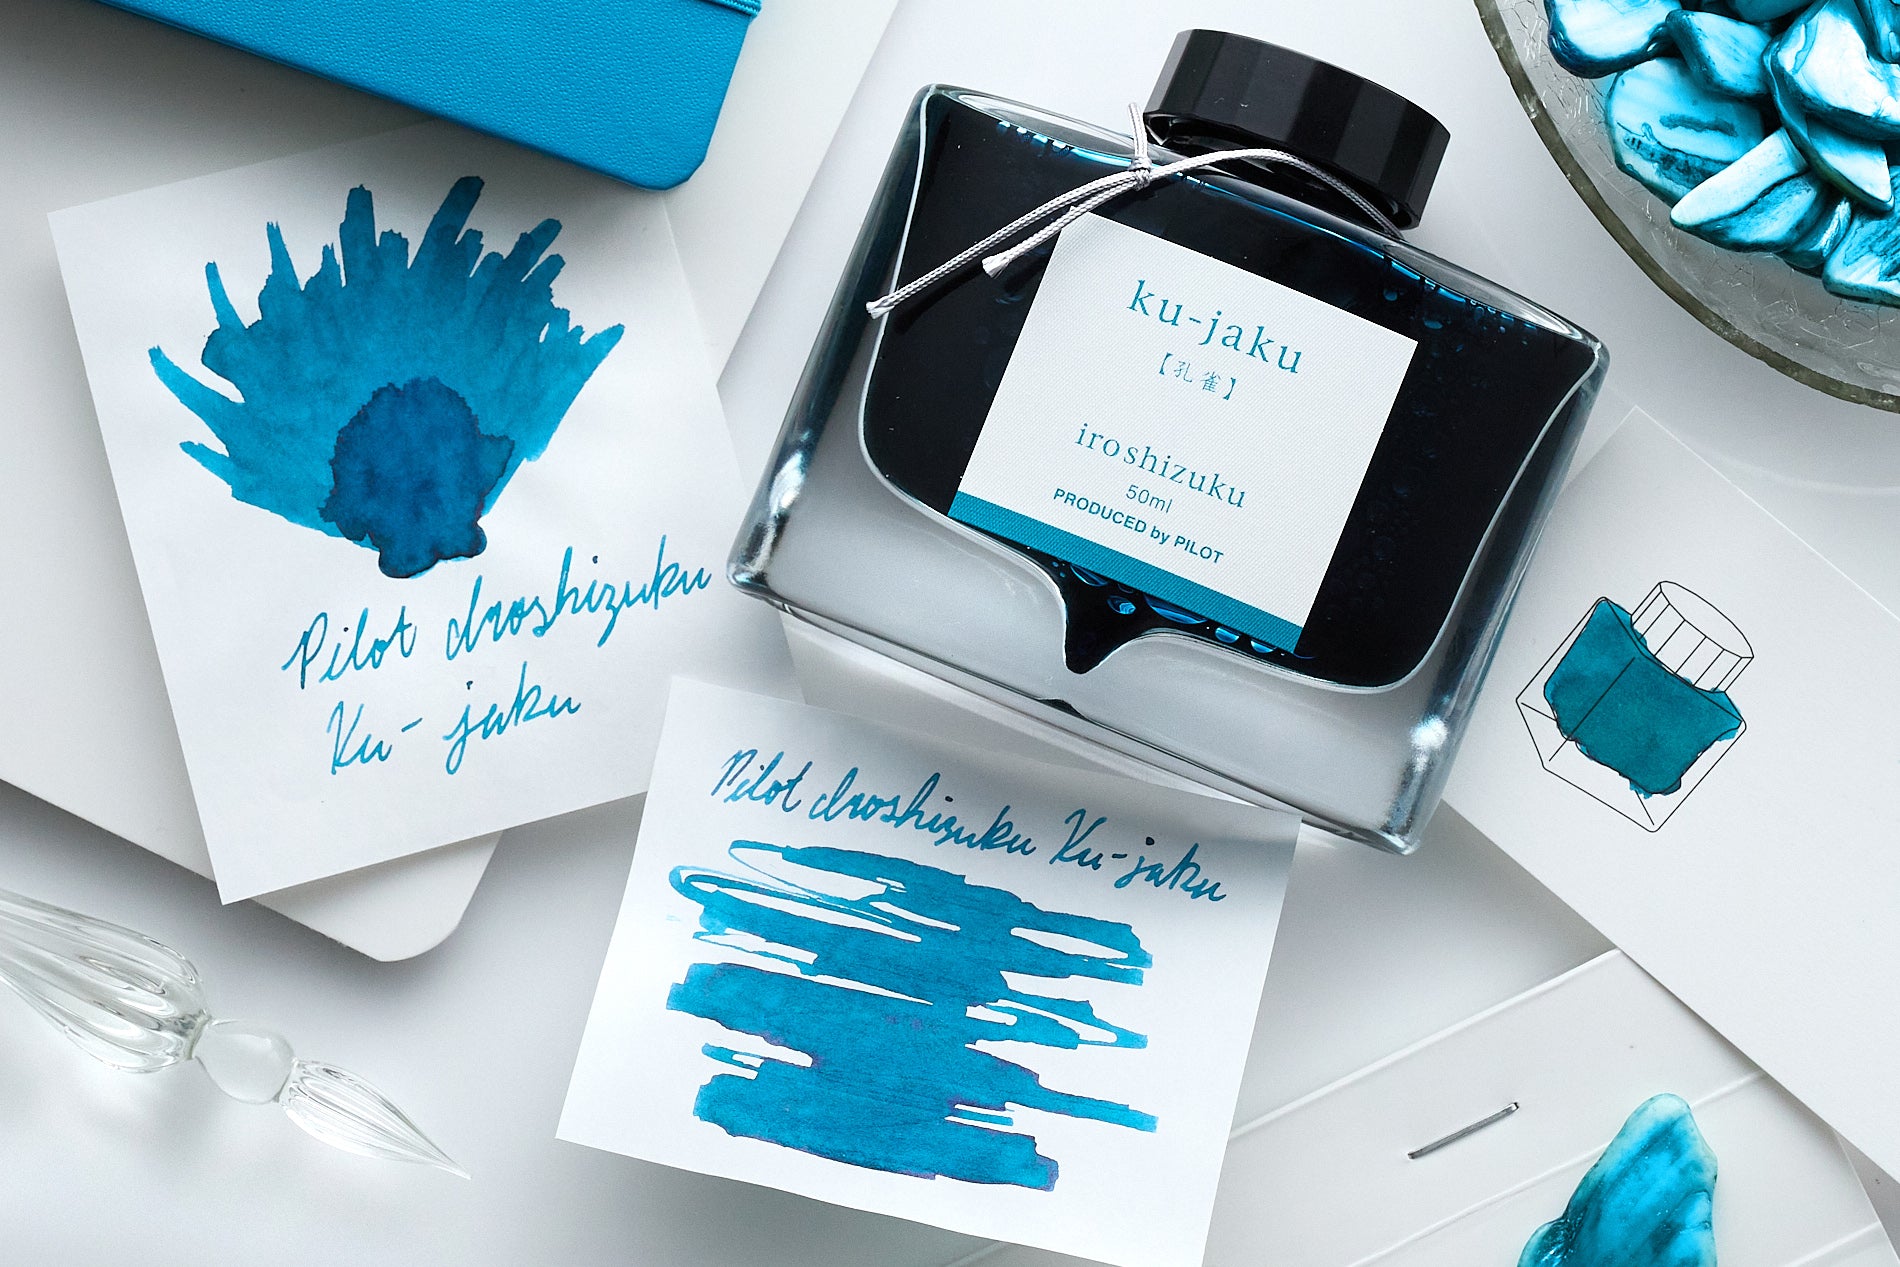 Pilot Iroshizuku Ku-Jaku Fountain Pen Ink writing sample, bottle and swabs on a white desk background with abalone shell pieces scattered about